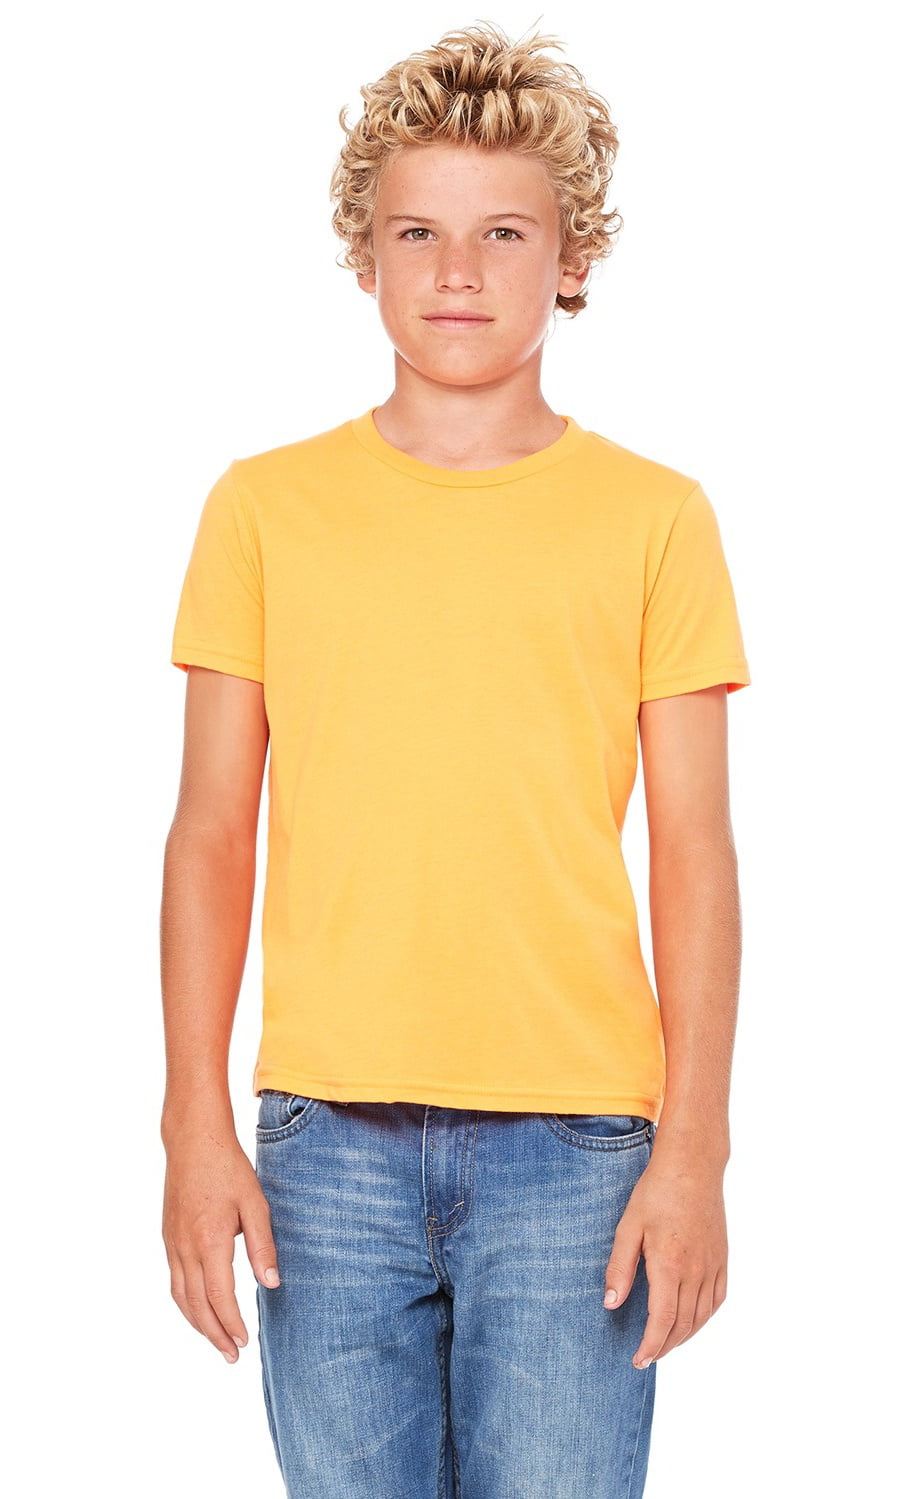 BELLA+CANVAS - The Bella + Canvas Youth Jersey Short Sleeve T-Shirt ...